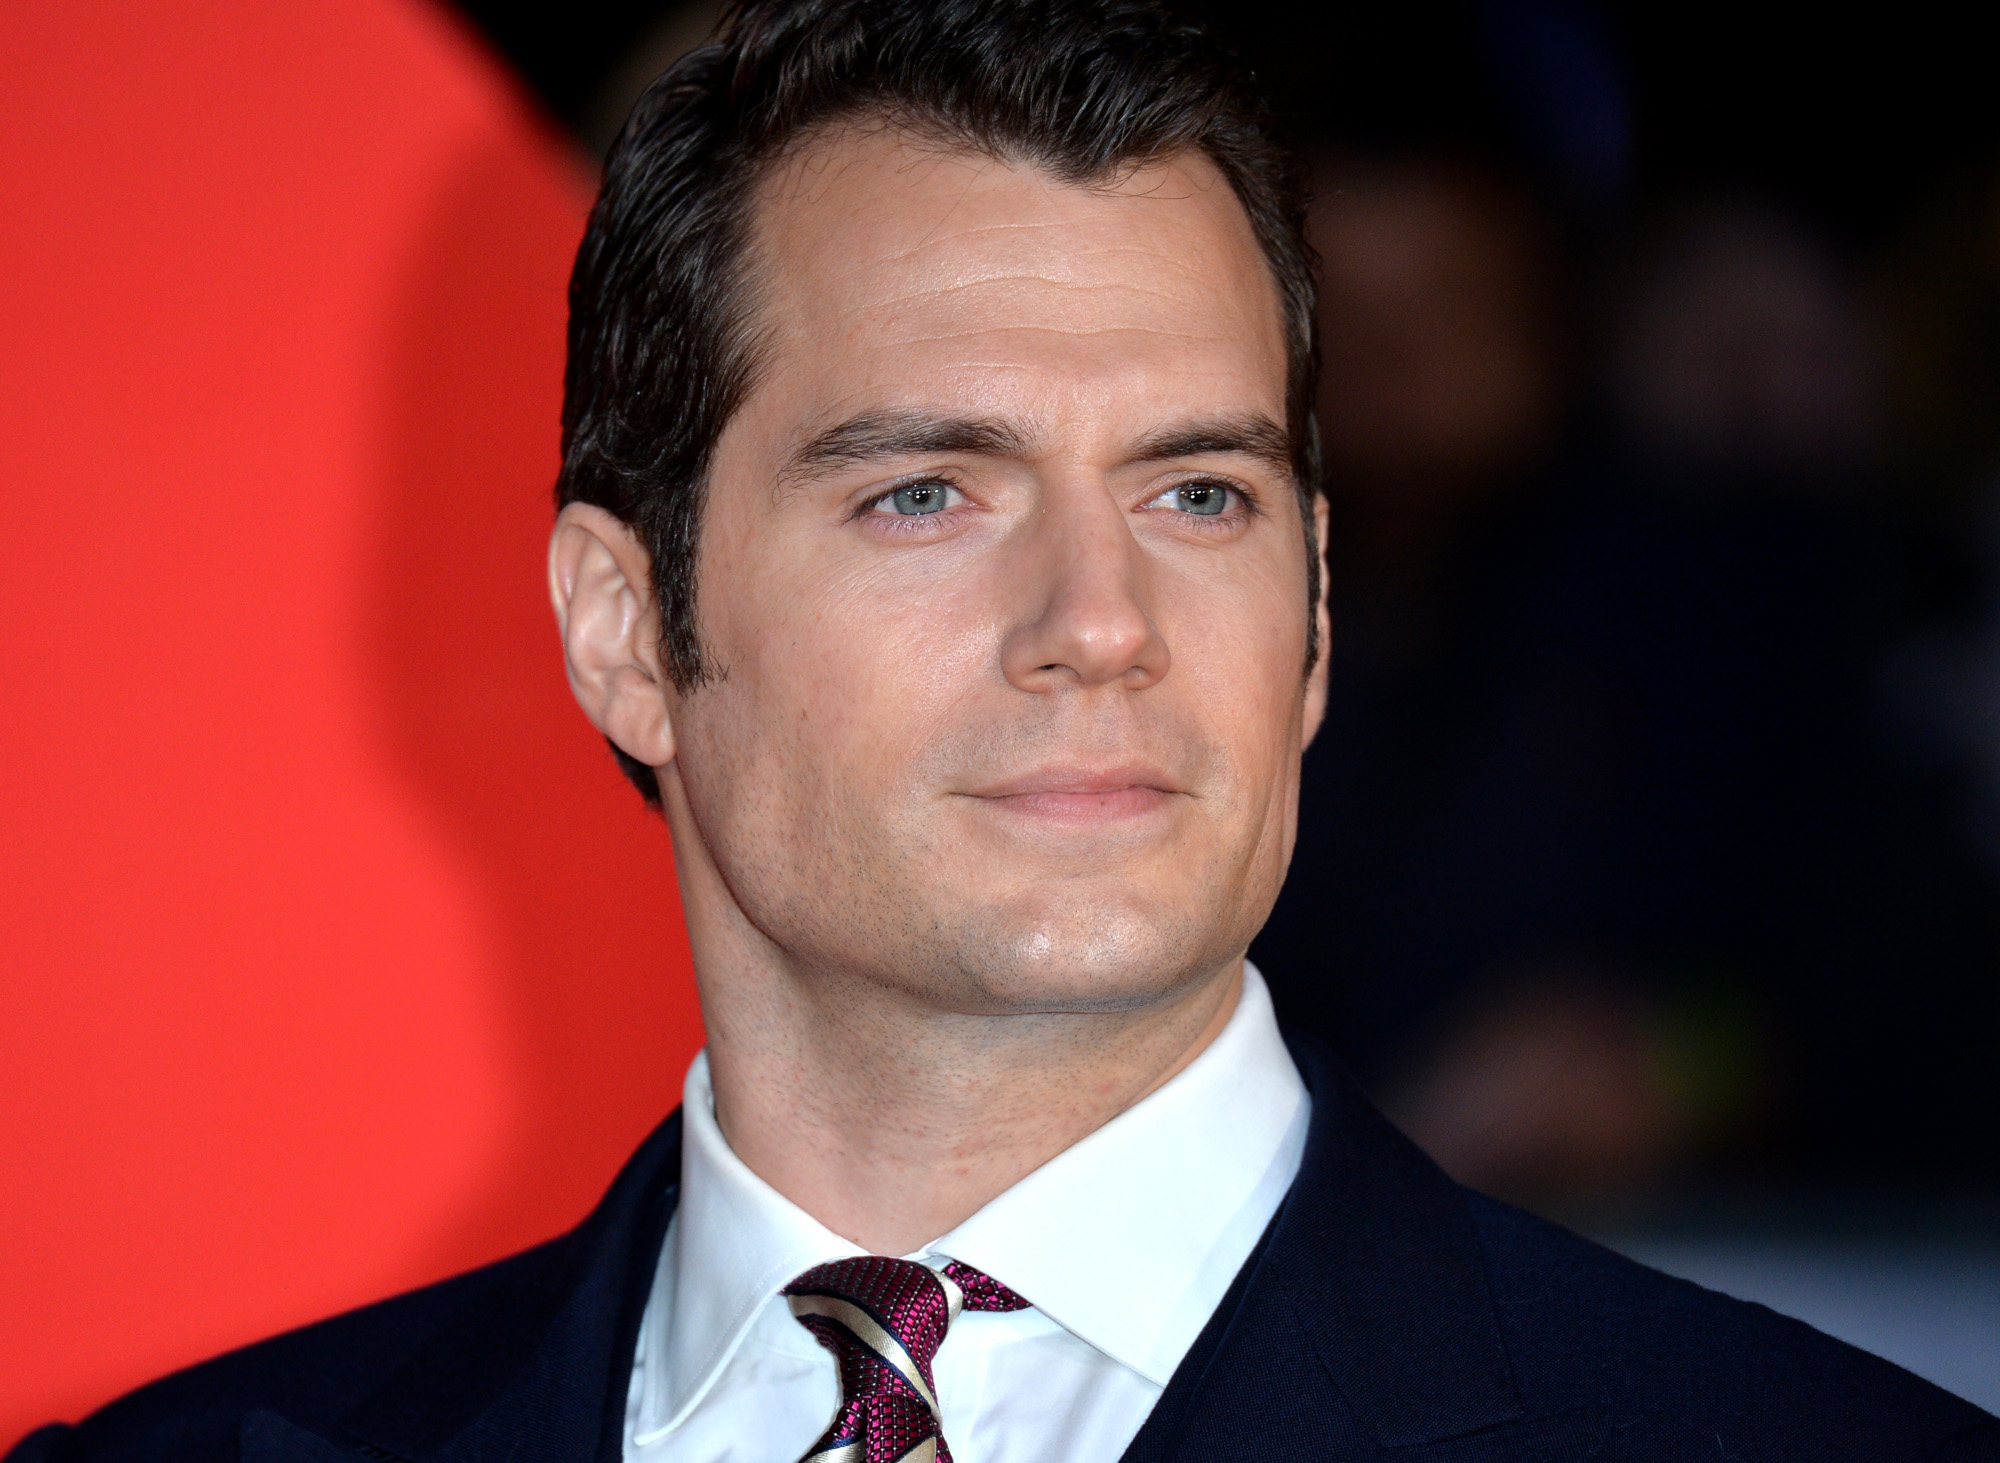 Superman star Henry Cavill wearing a suit with his hair slicked back.